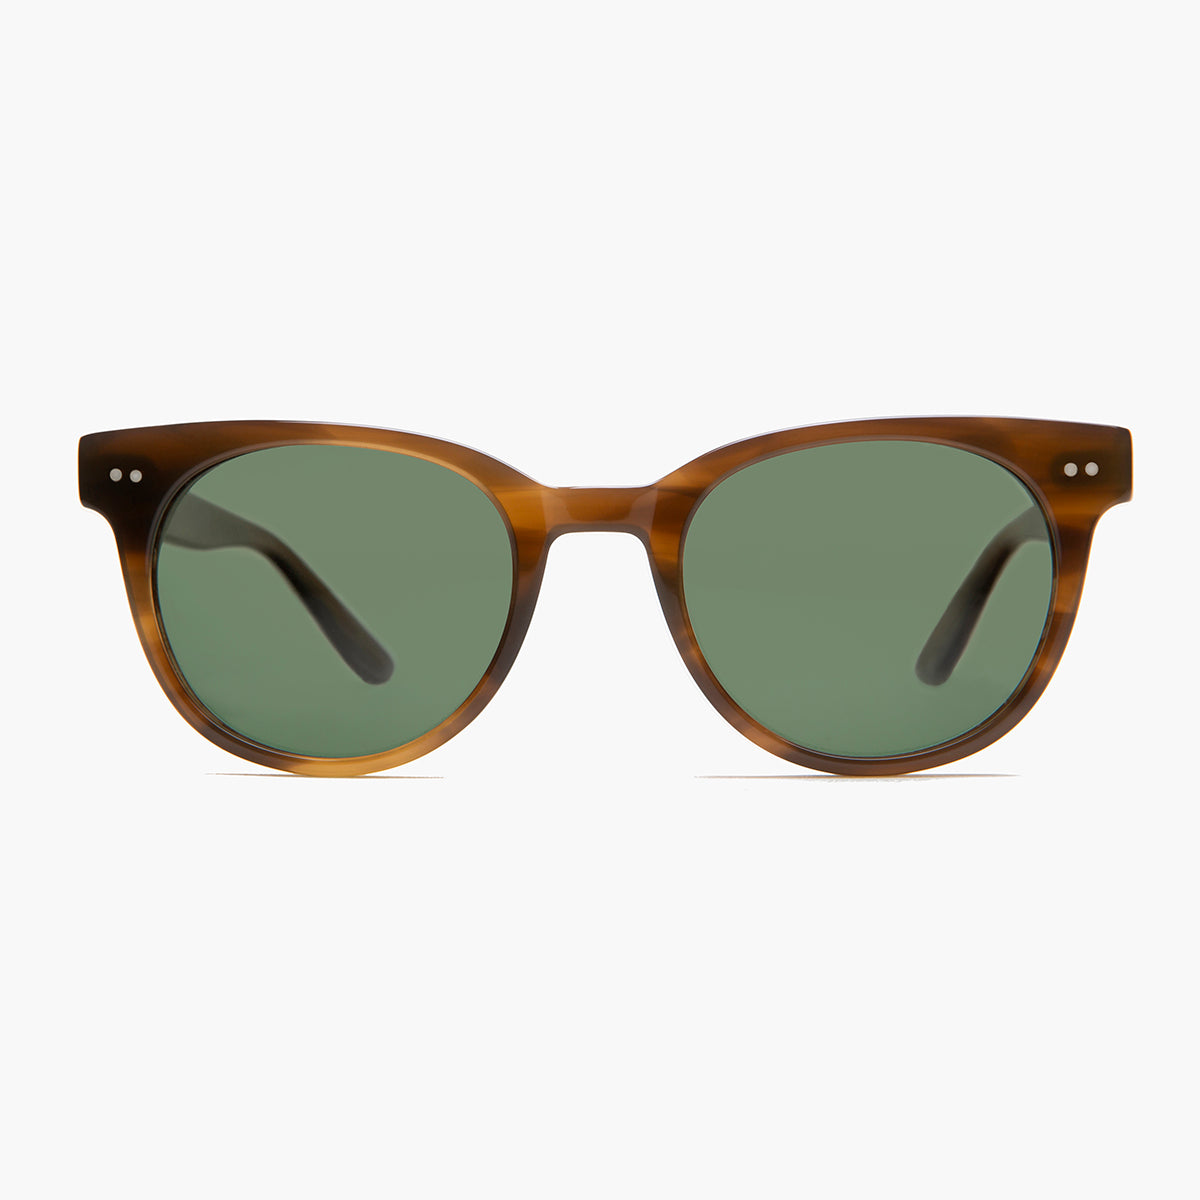 Sunglass Museum Round Hipster Sunglass with Polarized Lens - Darcy - Brown Tortoise / Green Lens